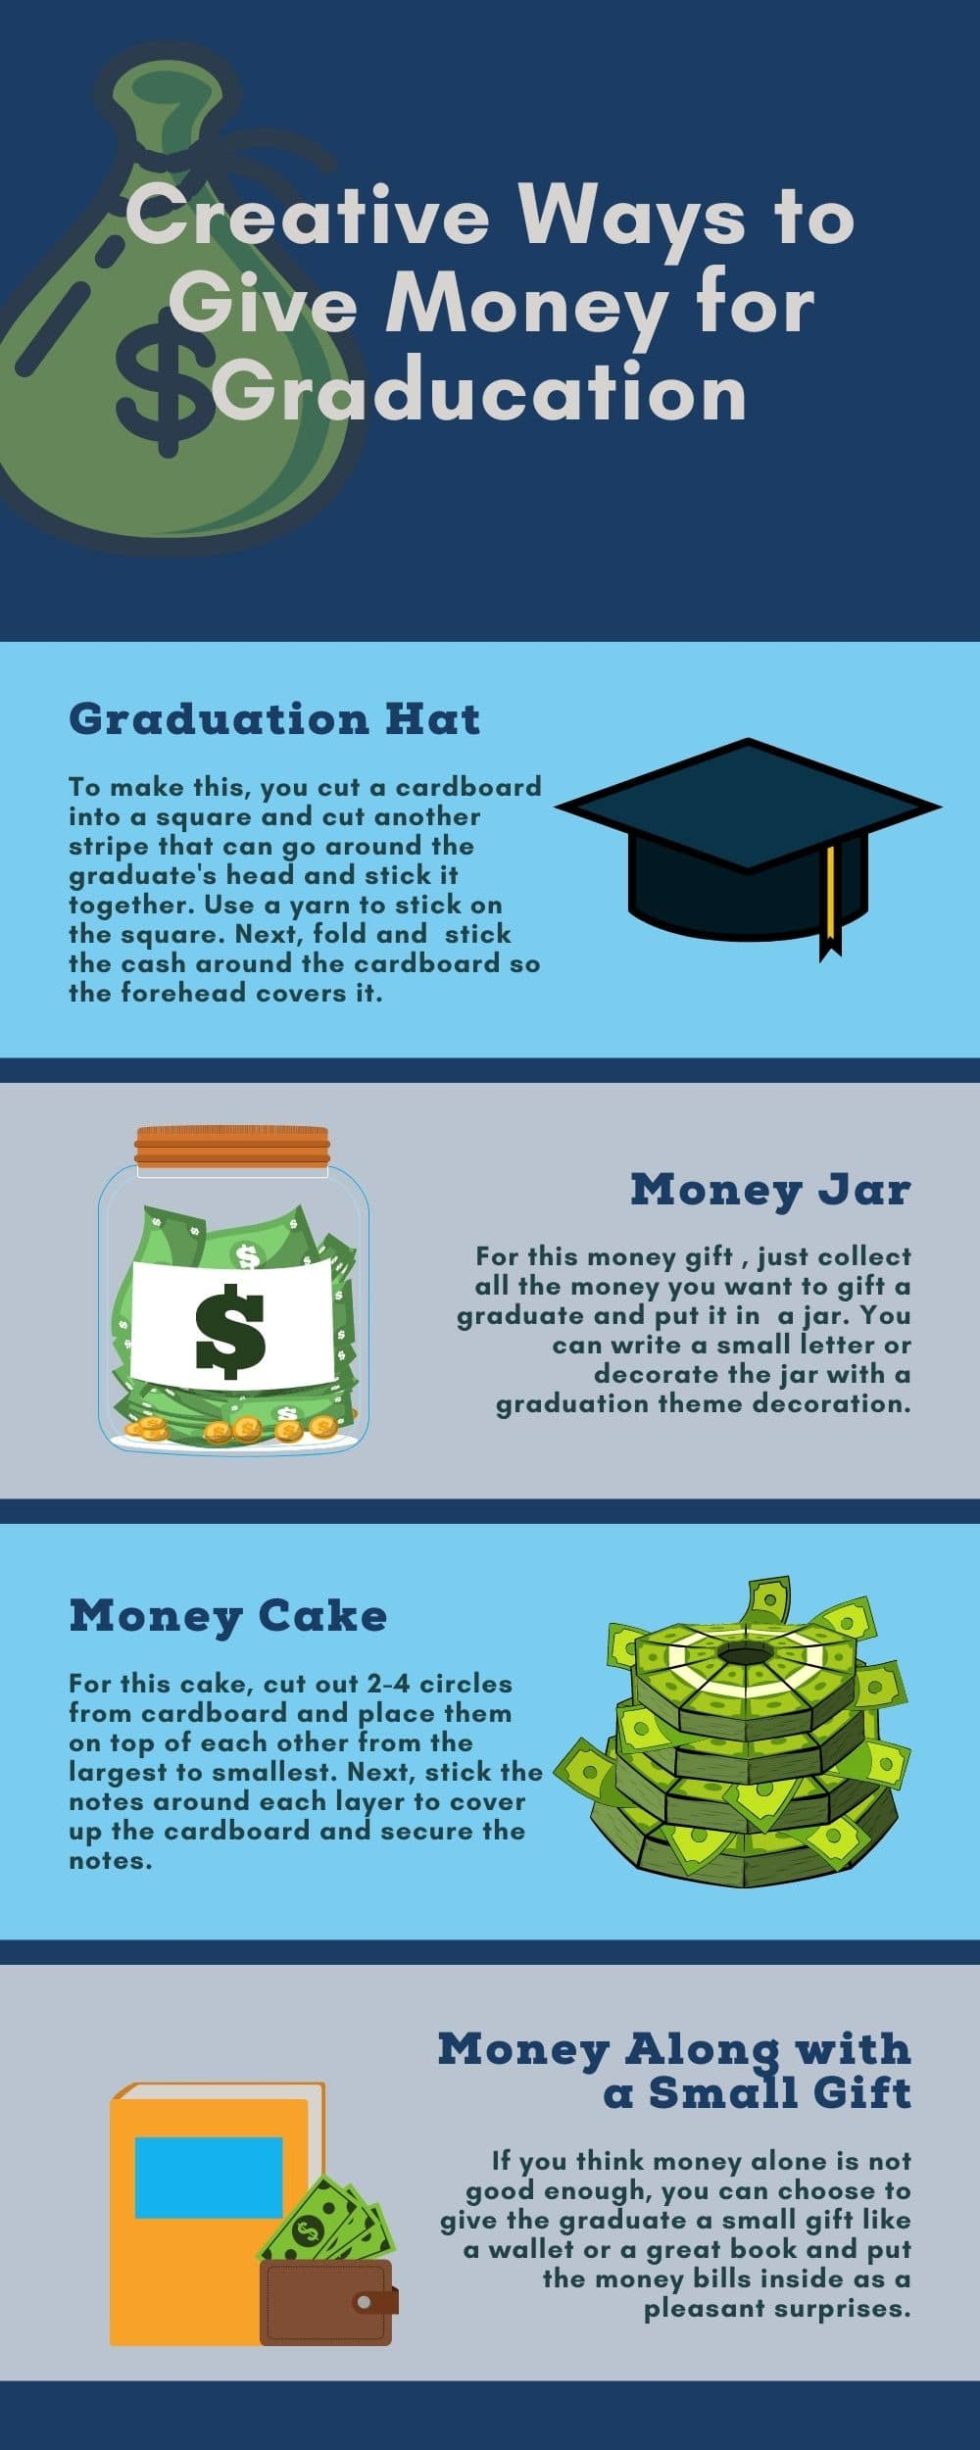 10 Creative Ways to Give Cash for Graduation What to get my